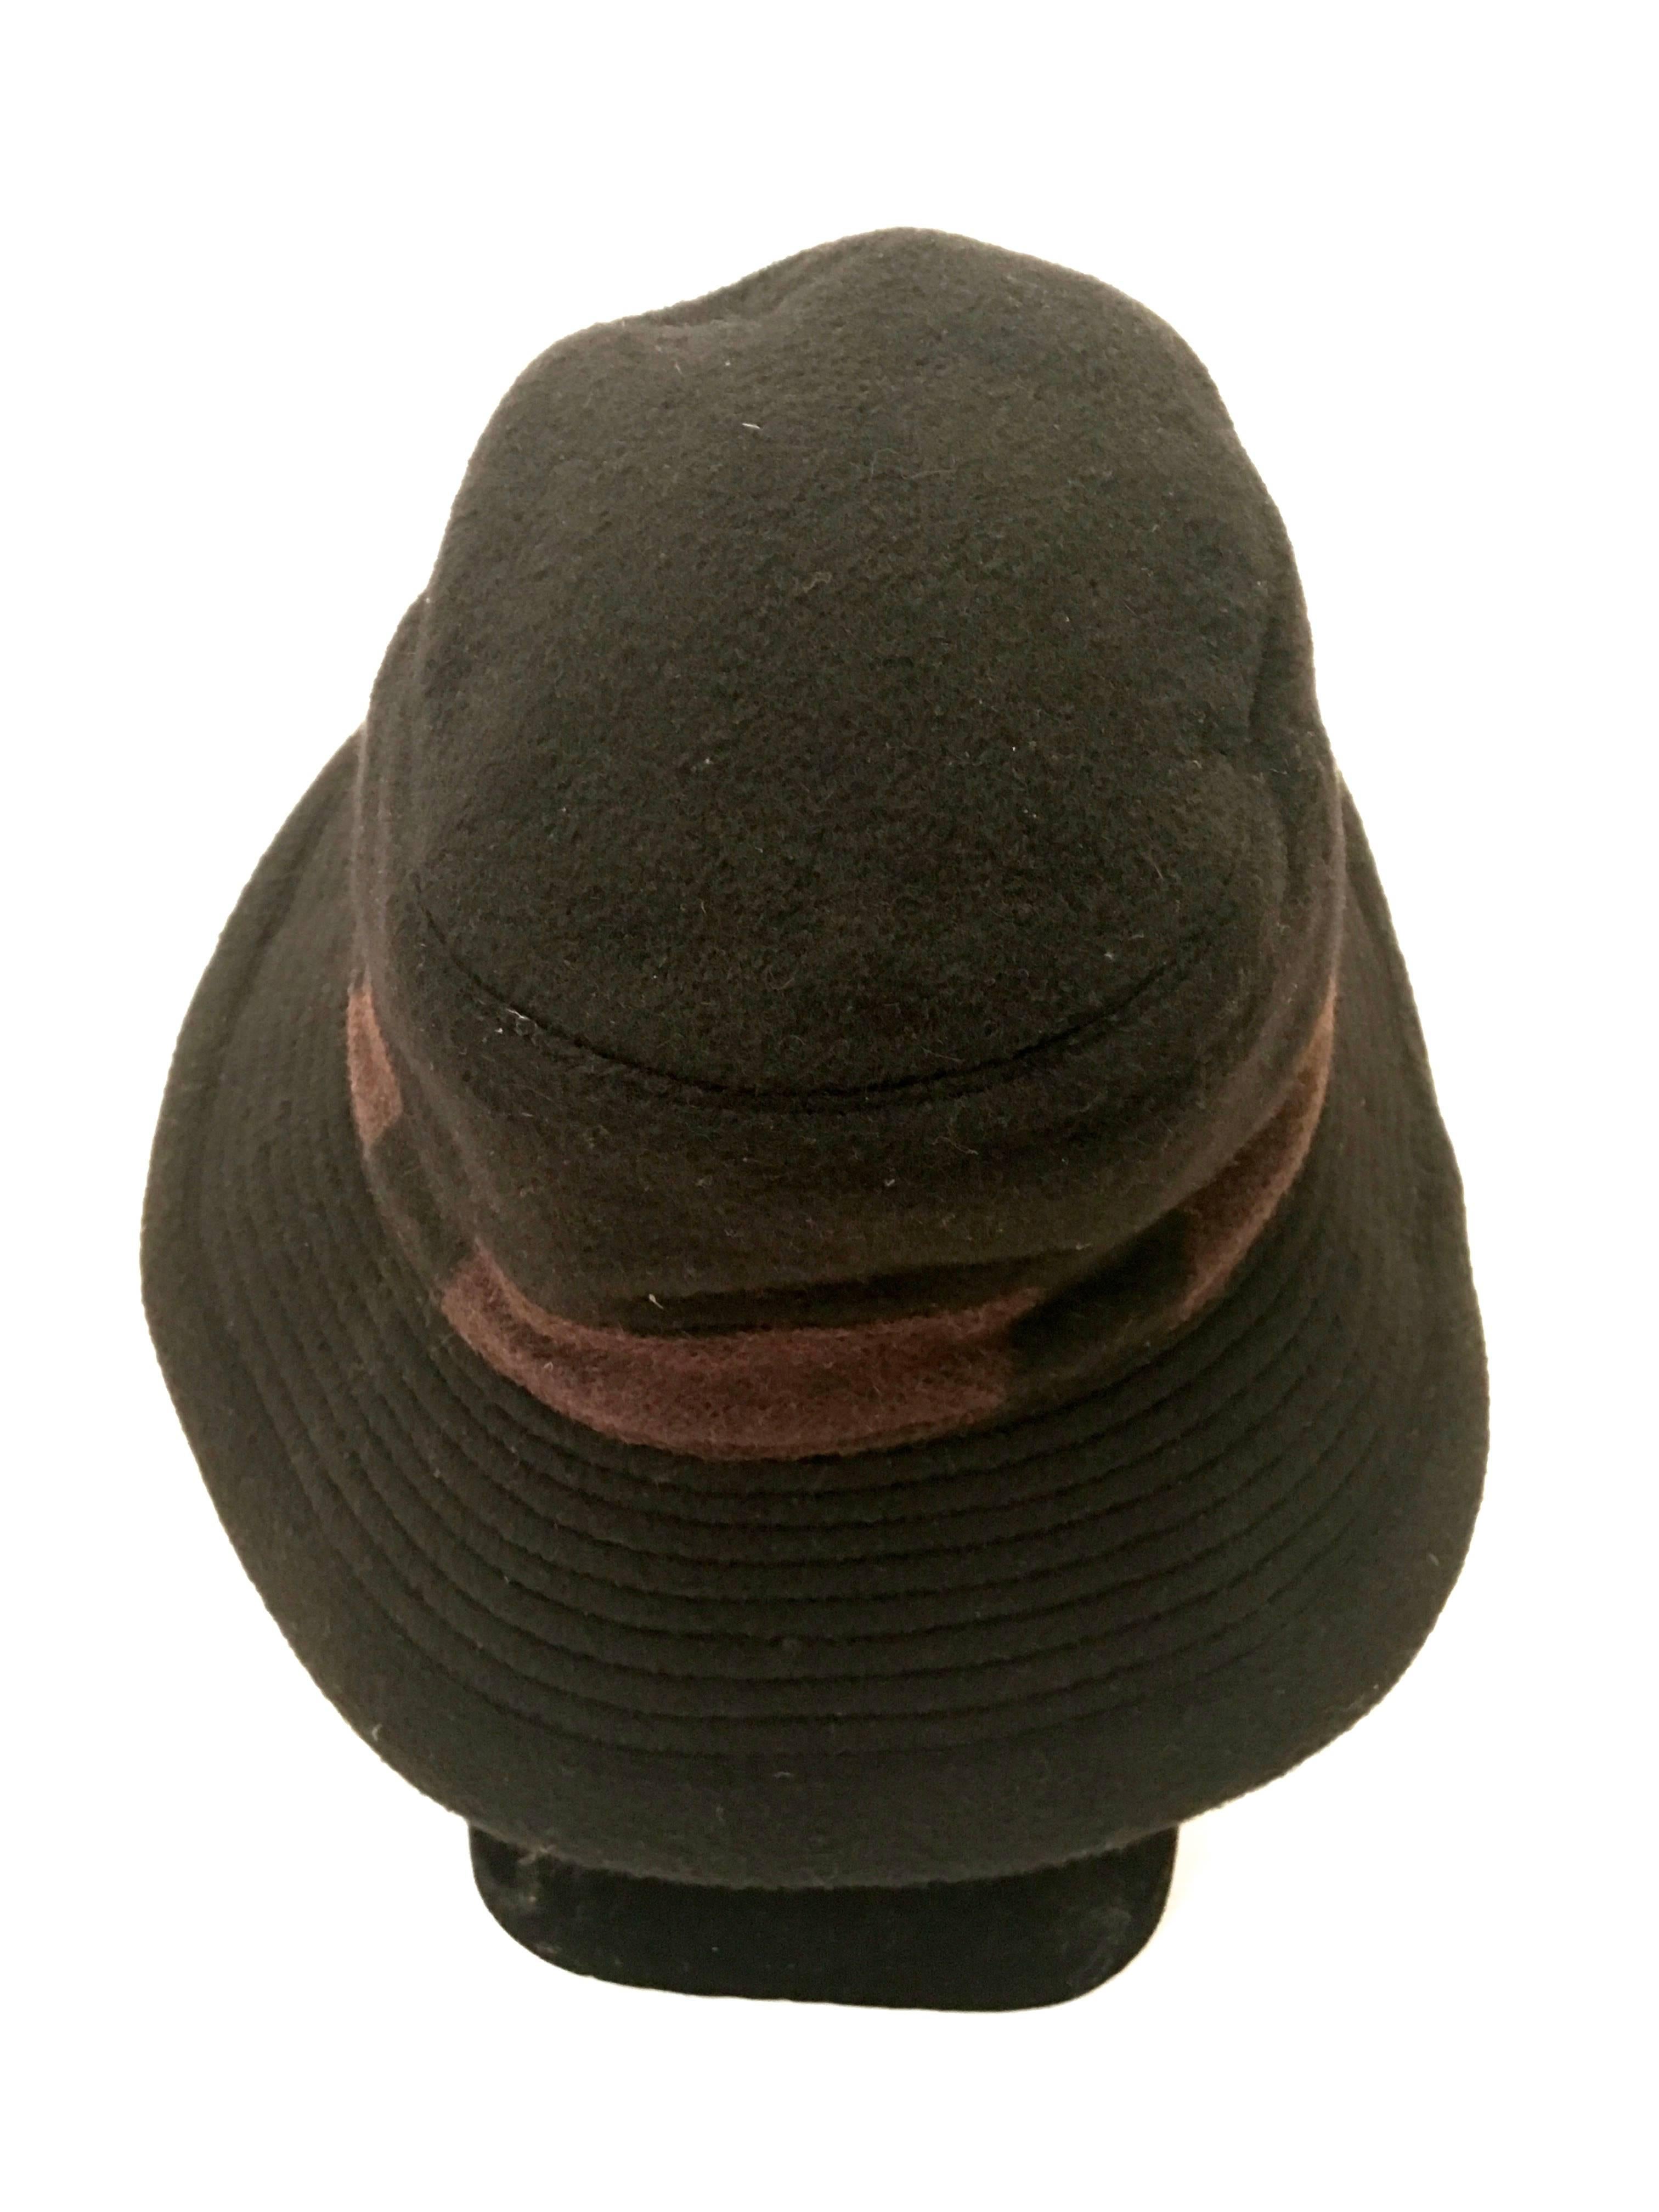 Rare Hermes Hat - Size 58 In Excellent Condition For Sale In Boca Raton, FL